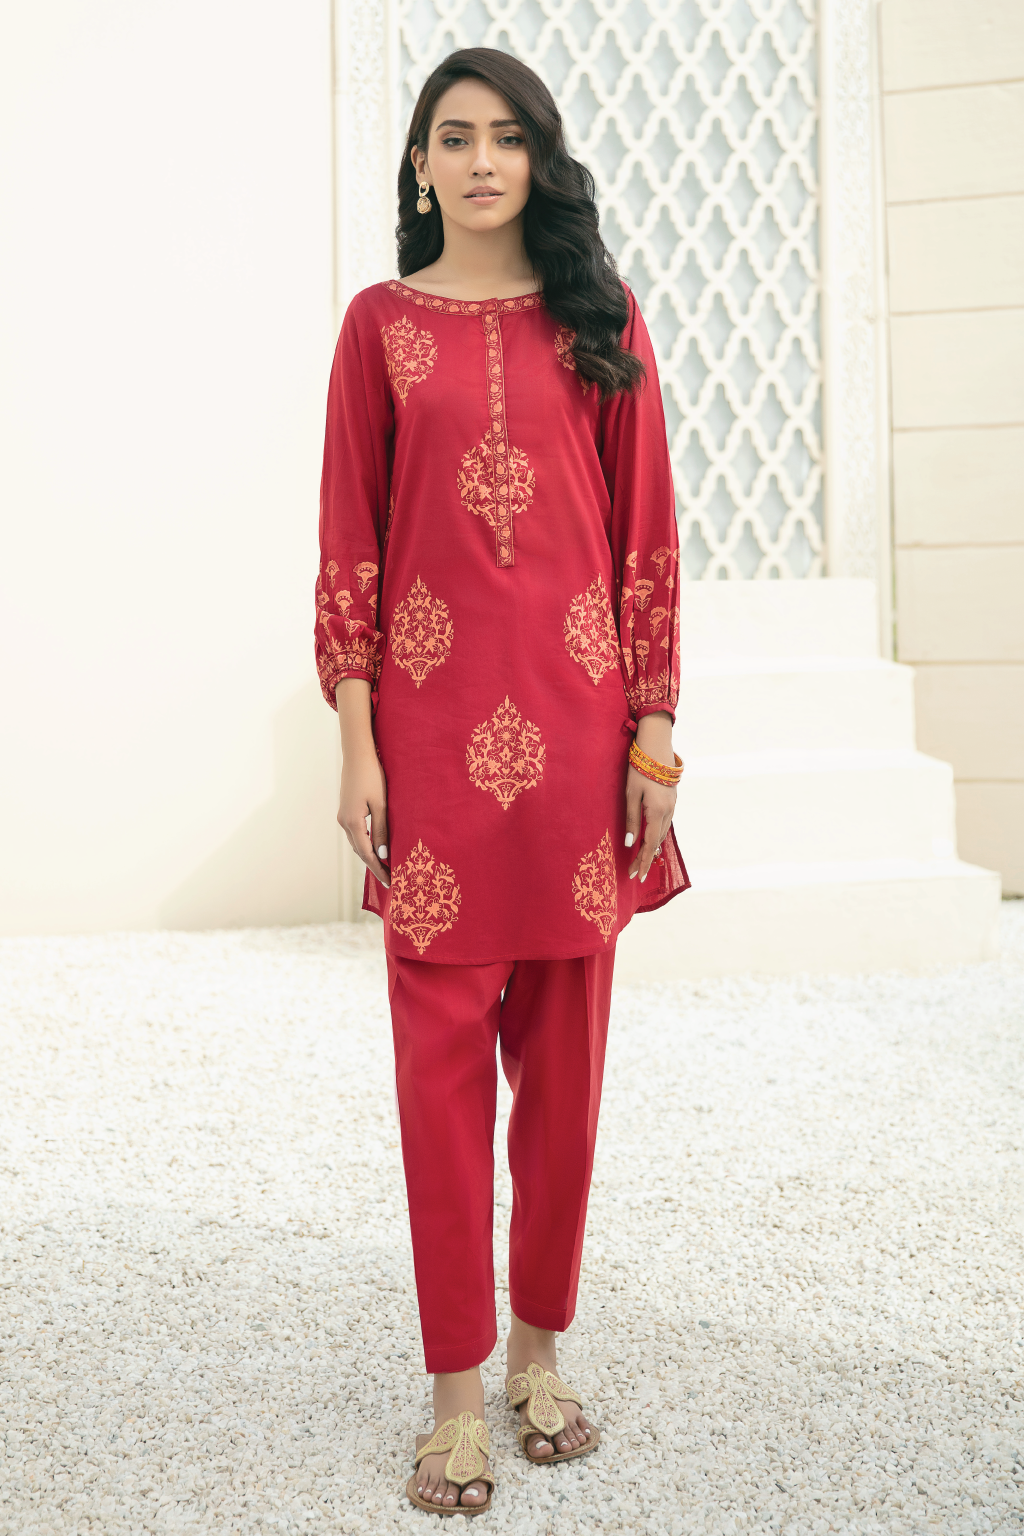 Iznik Pret Wear 2021 | CERISE Red 2 piece lawn dress is most popular for Eid dress and summer outfits. We have wide range of stitched and Readymade dresses of Iznik lawn 2021, Iznik pret '21. This Eid get yourself elegant and classy outfit of Iznik in USA, UK, France, Spain from Lebaasonline at SALE price!